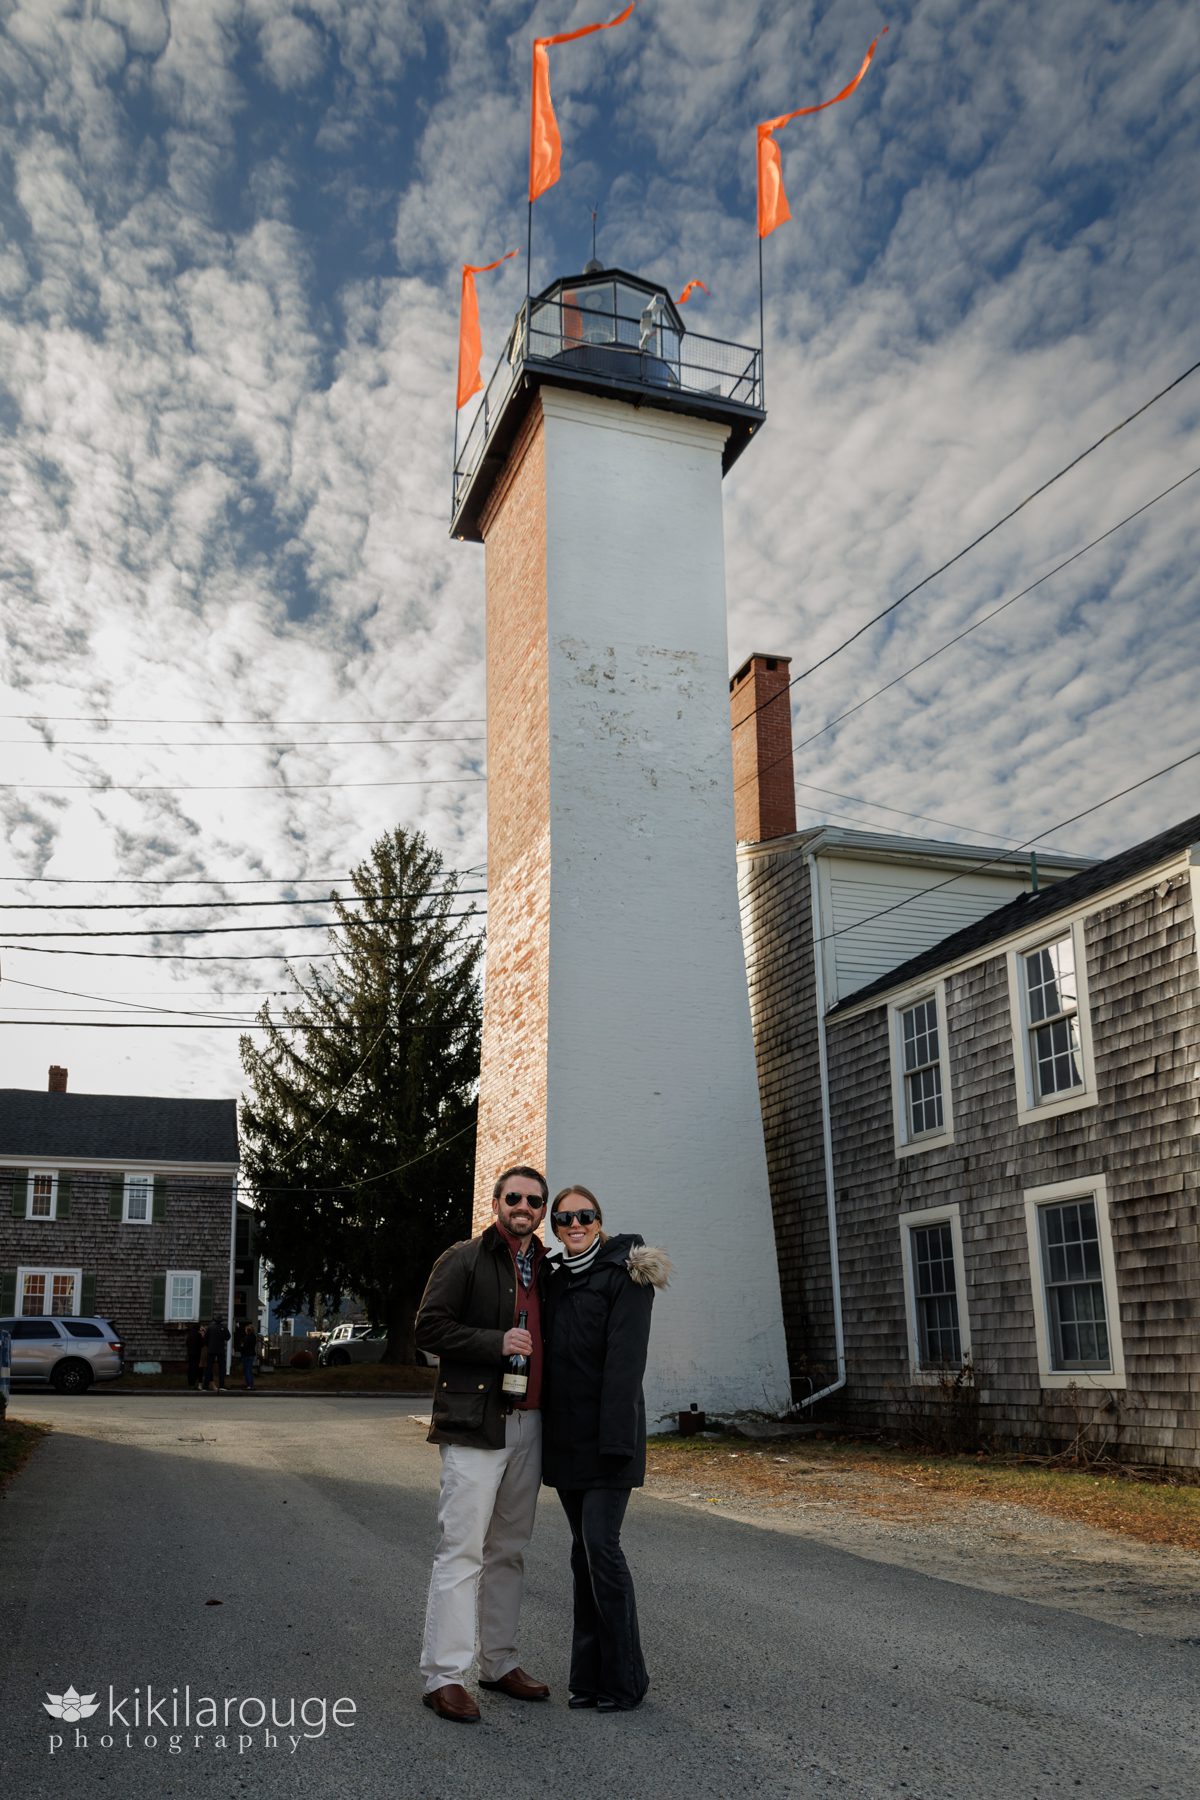 Couple in front of the NBPT lighthouse with dramatic clouds in the sky